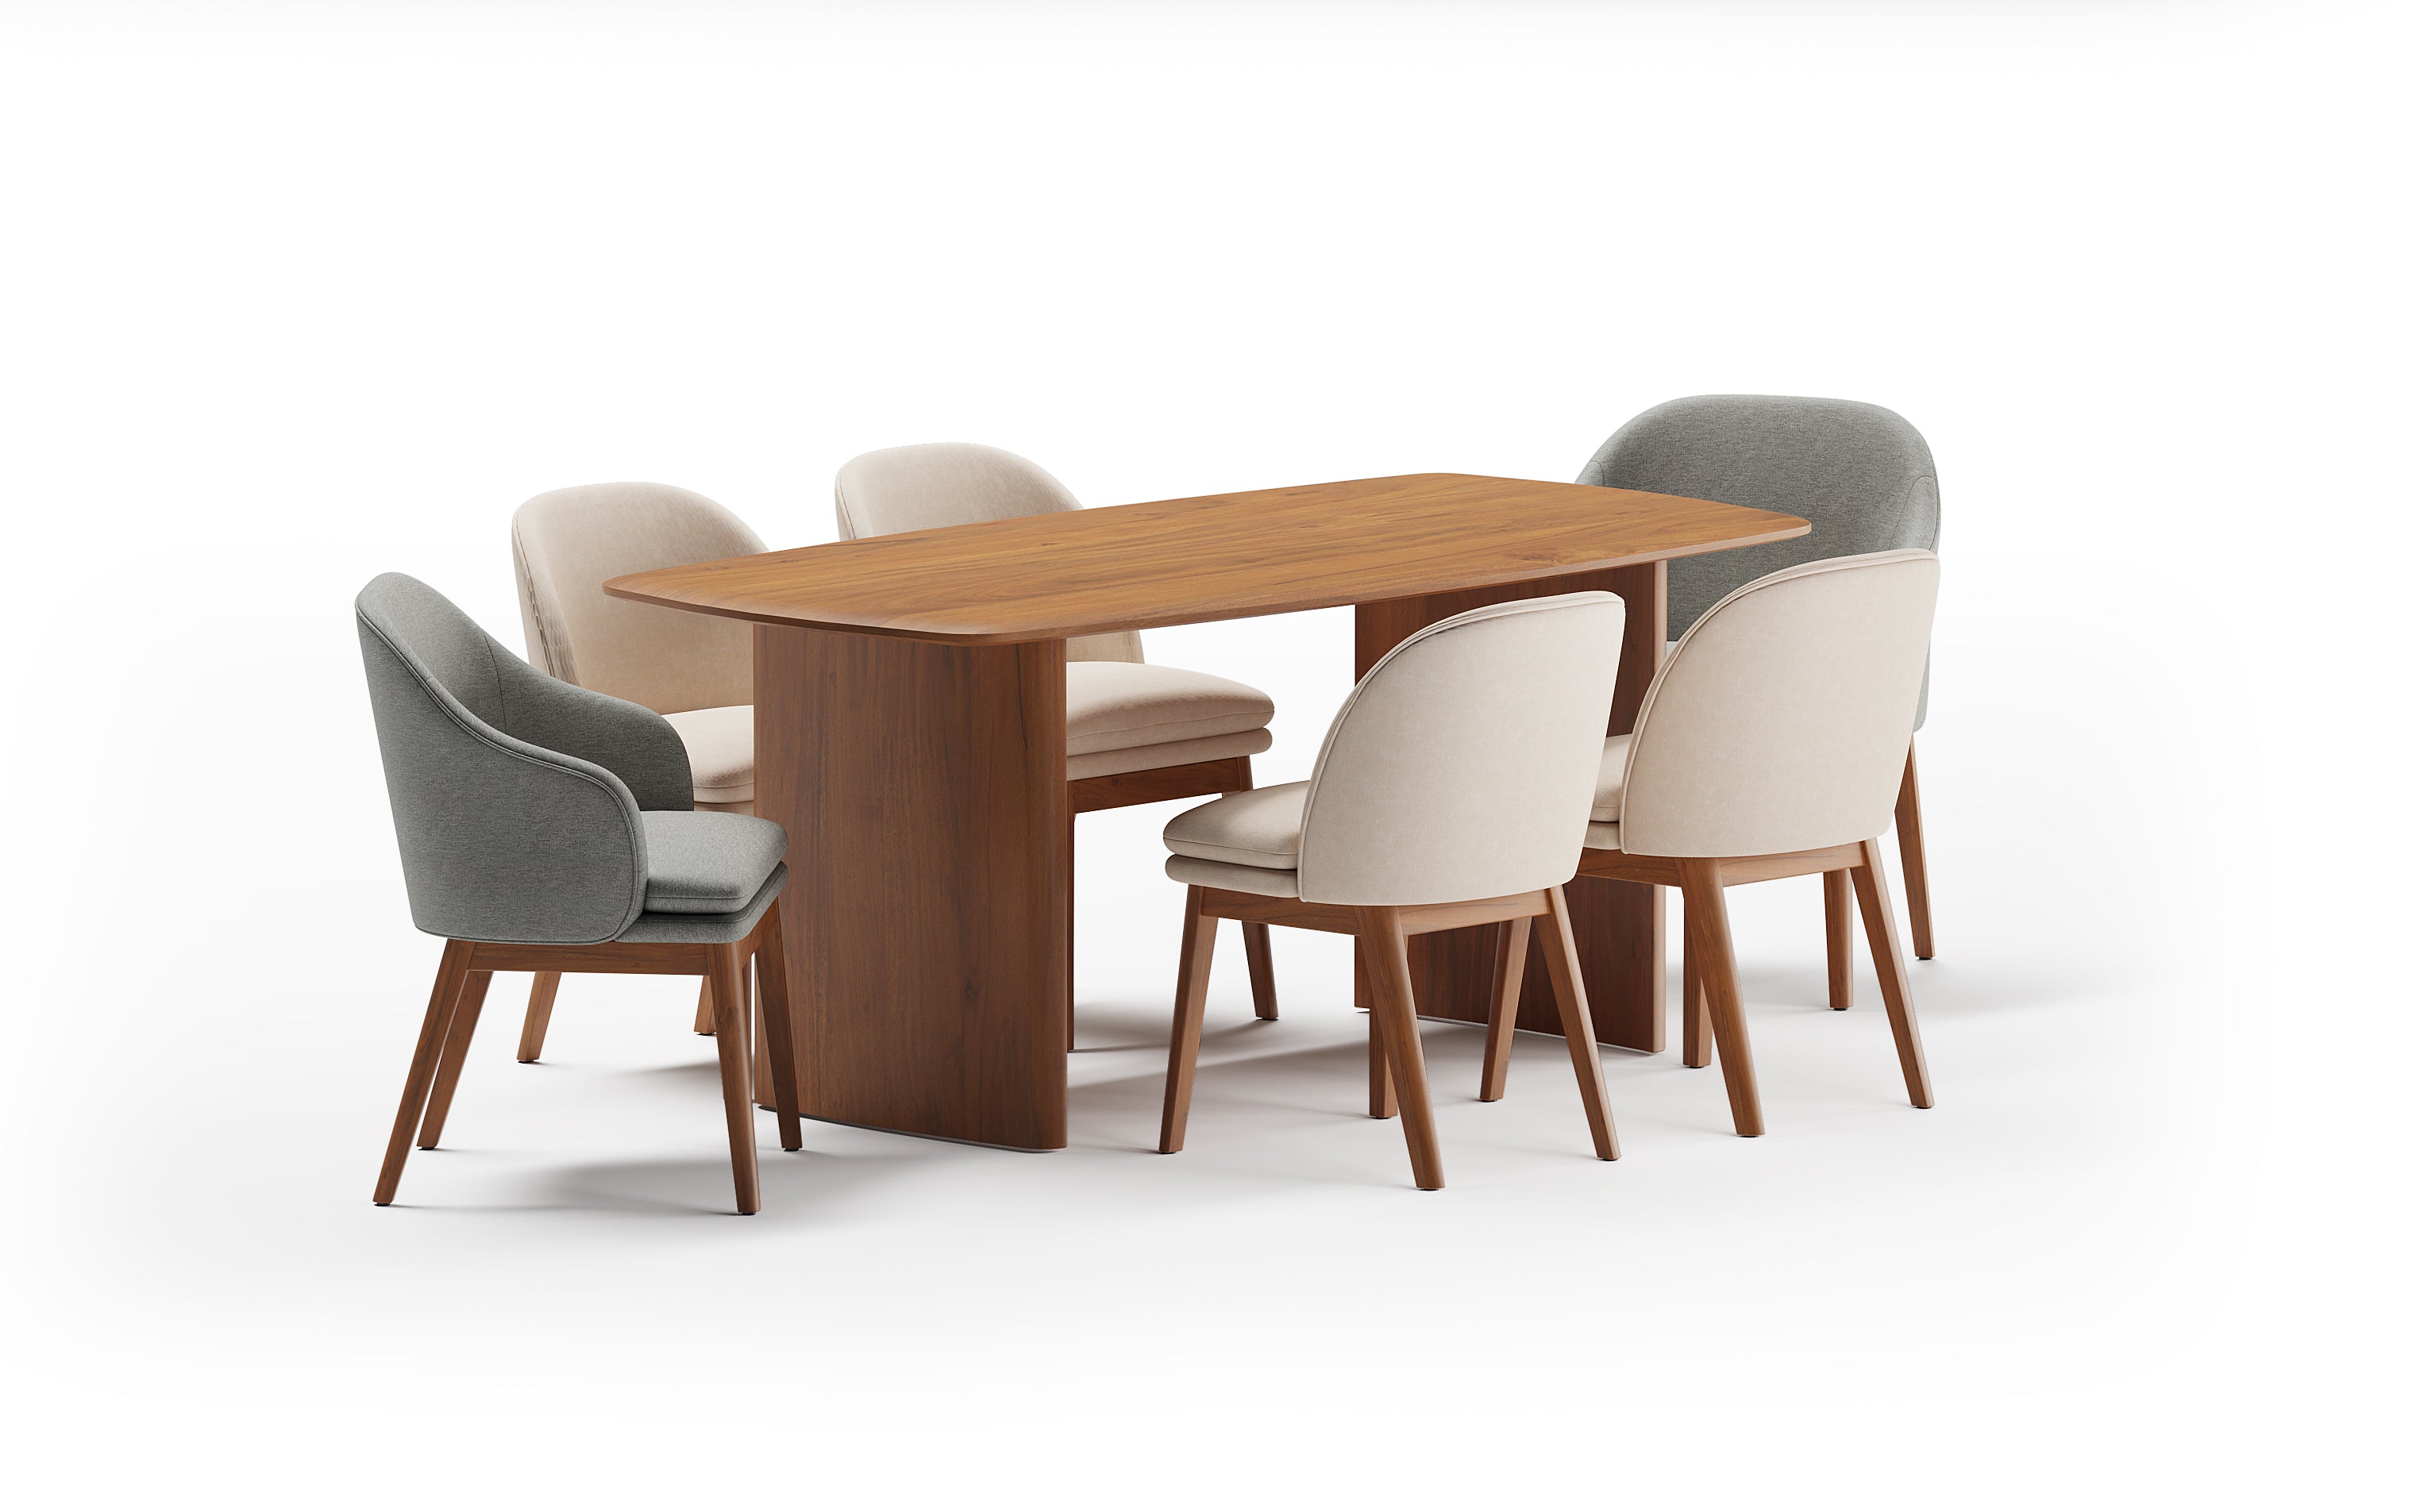 Anish Dining Table With 4 Wayane Chair and 2 Wayane Chair With Arm Media - Orange Tree Home 